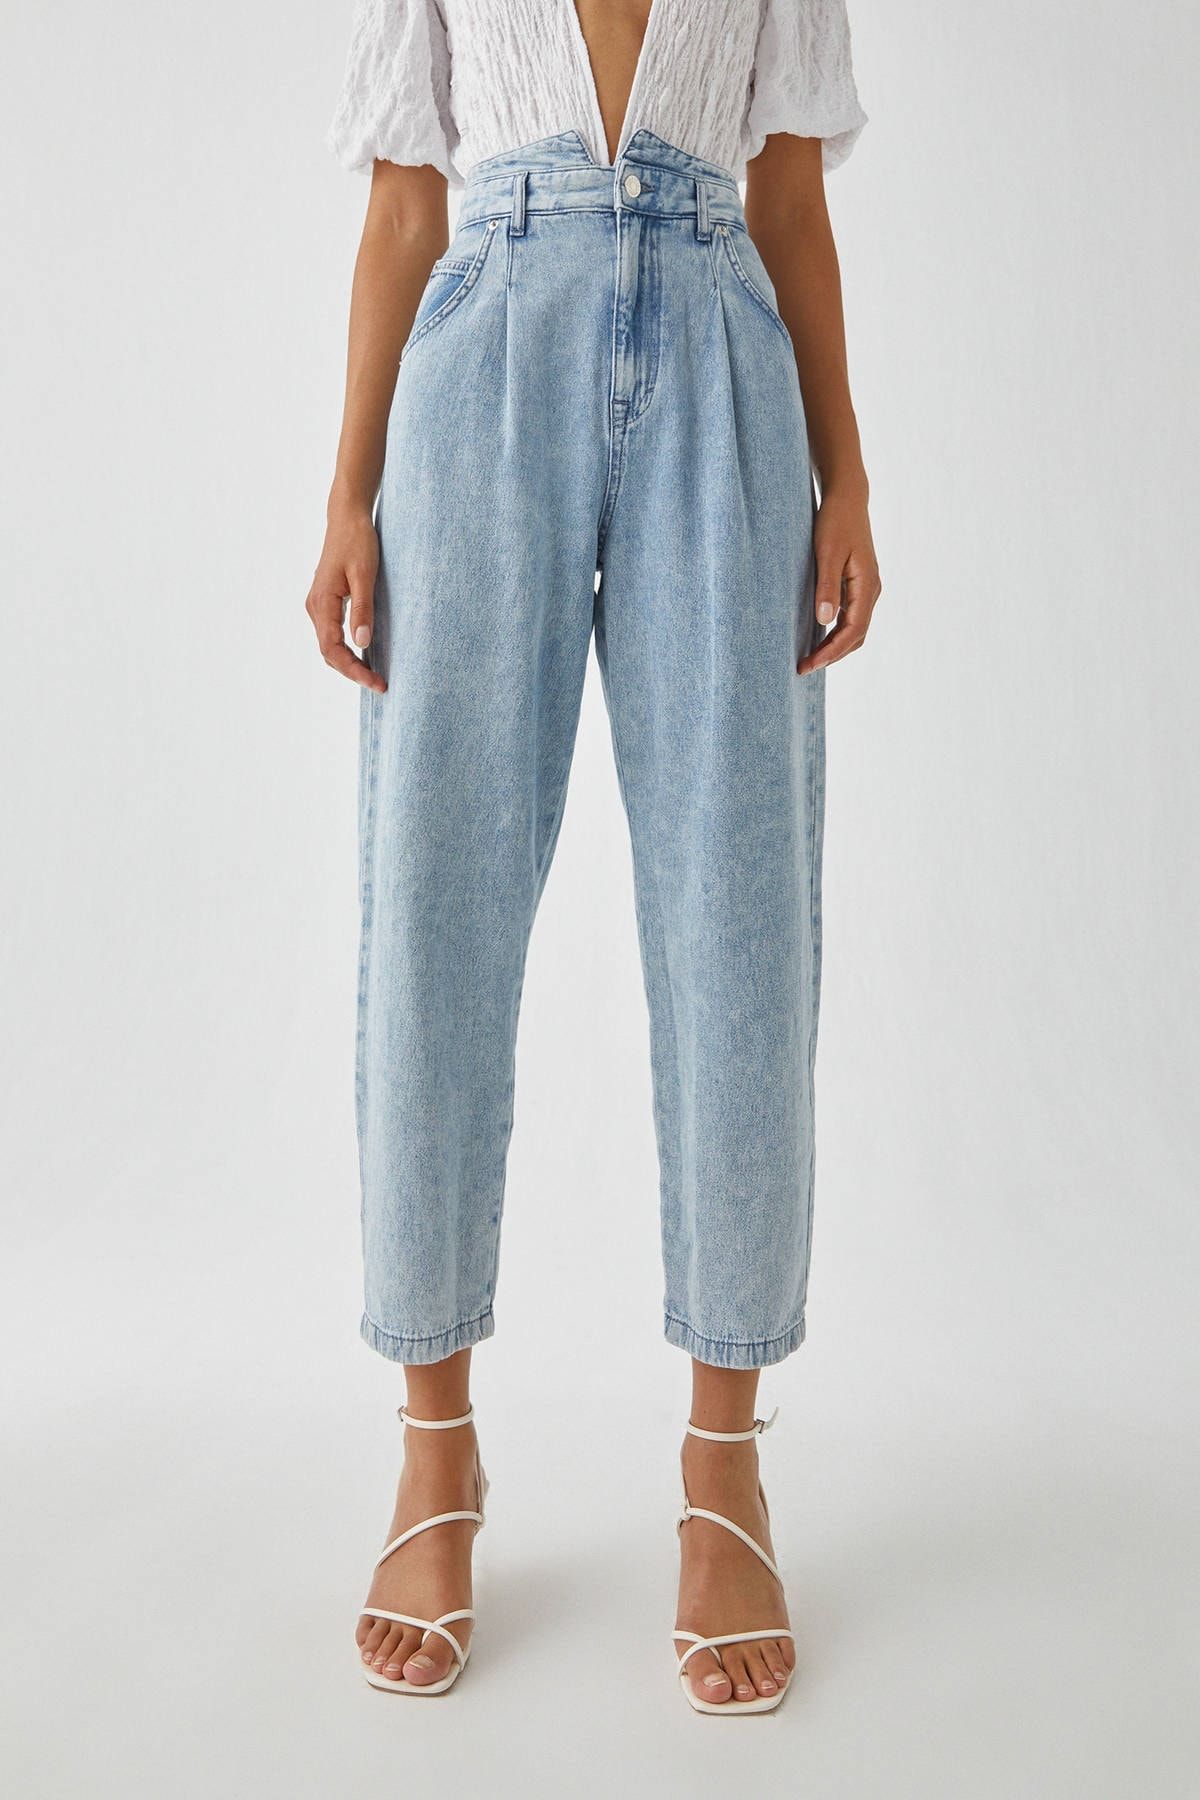 Pull & Bear Loose Fit Slouchy Jean